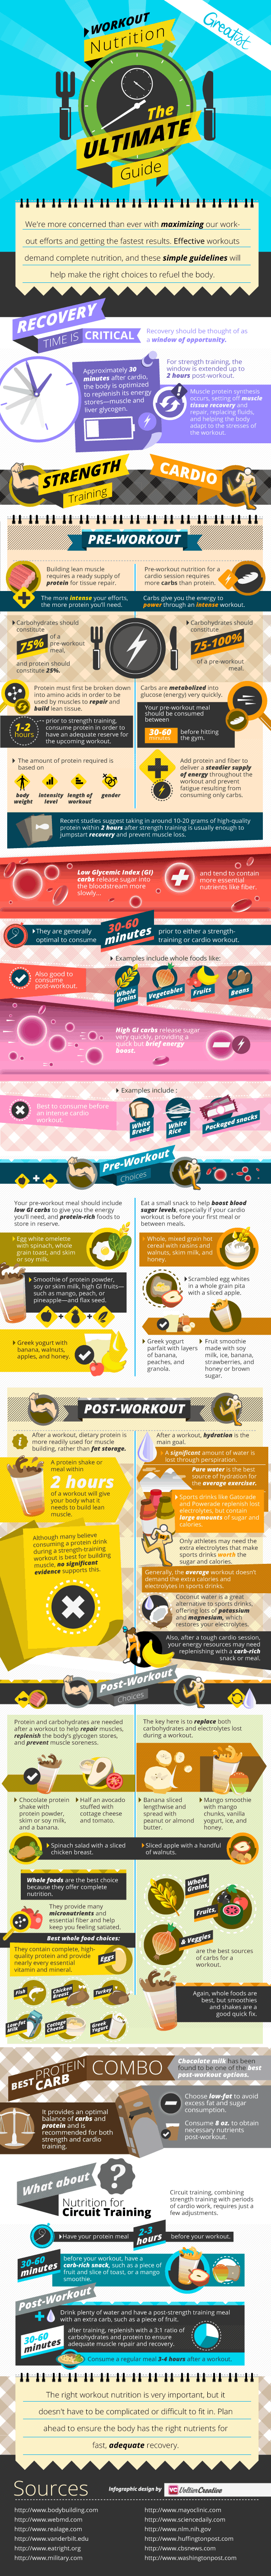 Ultimate Workout Nutrition Guide